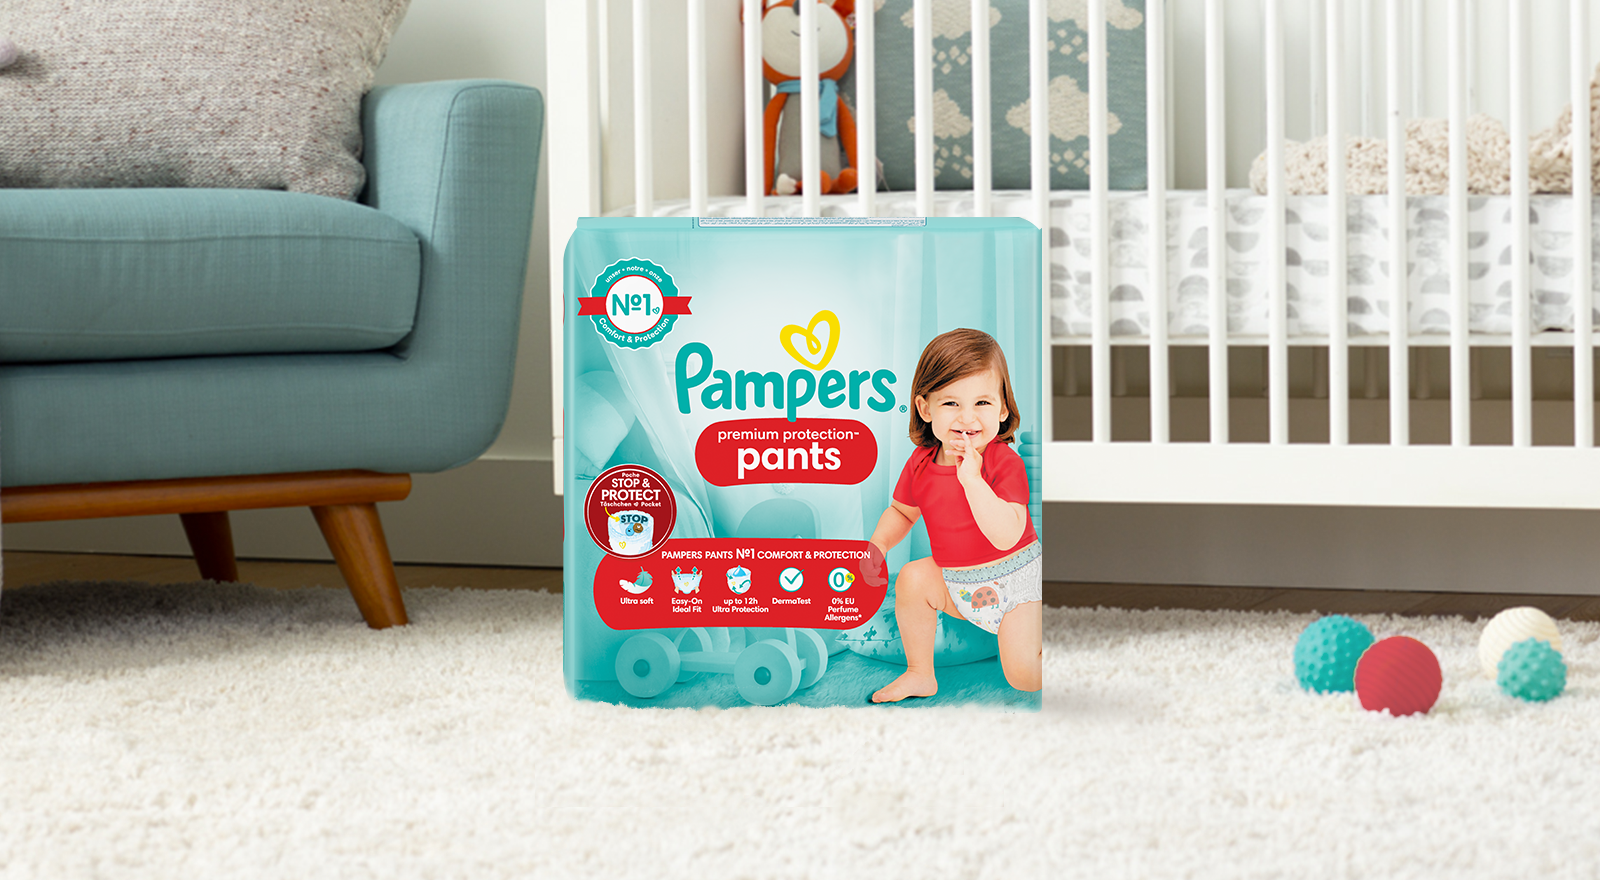 Couches-Culottes Premium Protection Taille 5 12Kg-17Kg PAMPERS